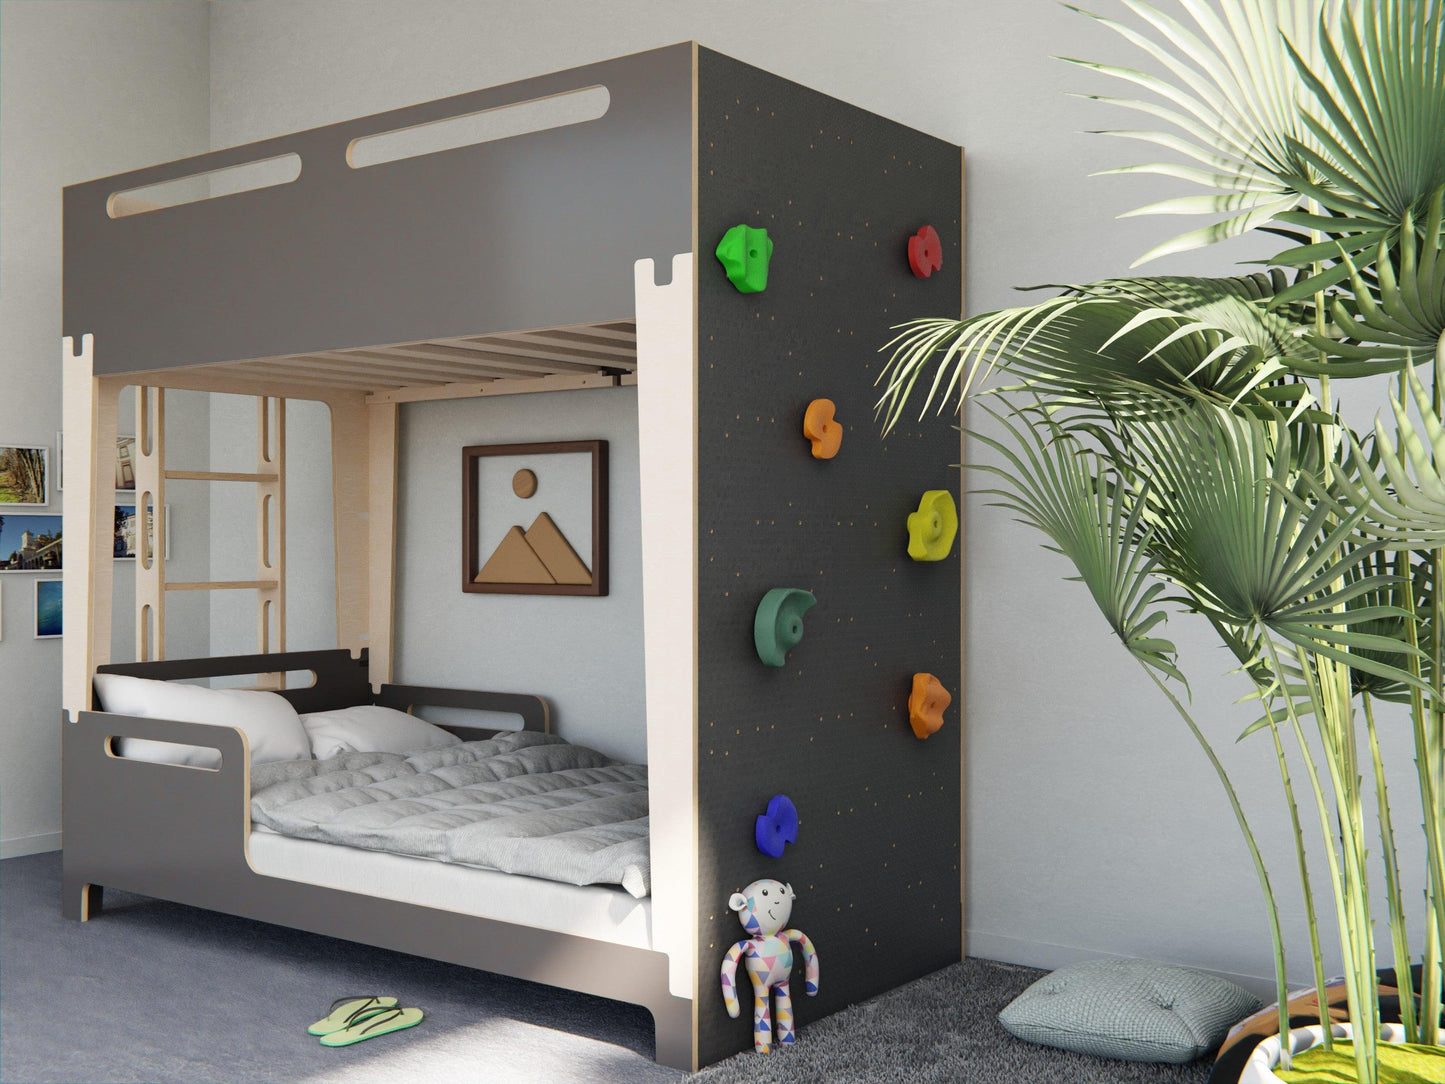 Enjoy the minimalistic charm of our Scandinavian-style plywood bunk beds with rock climbing wall.